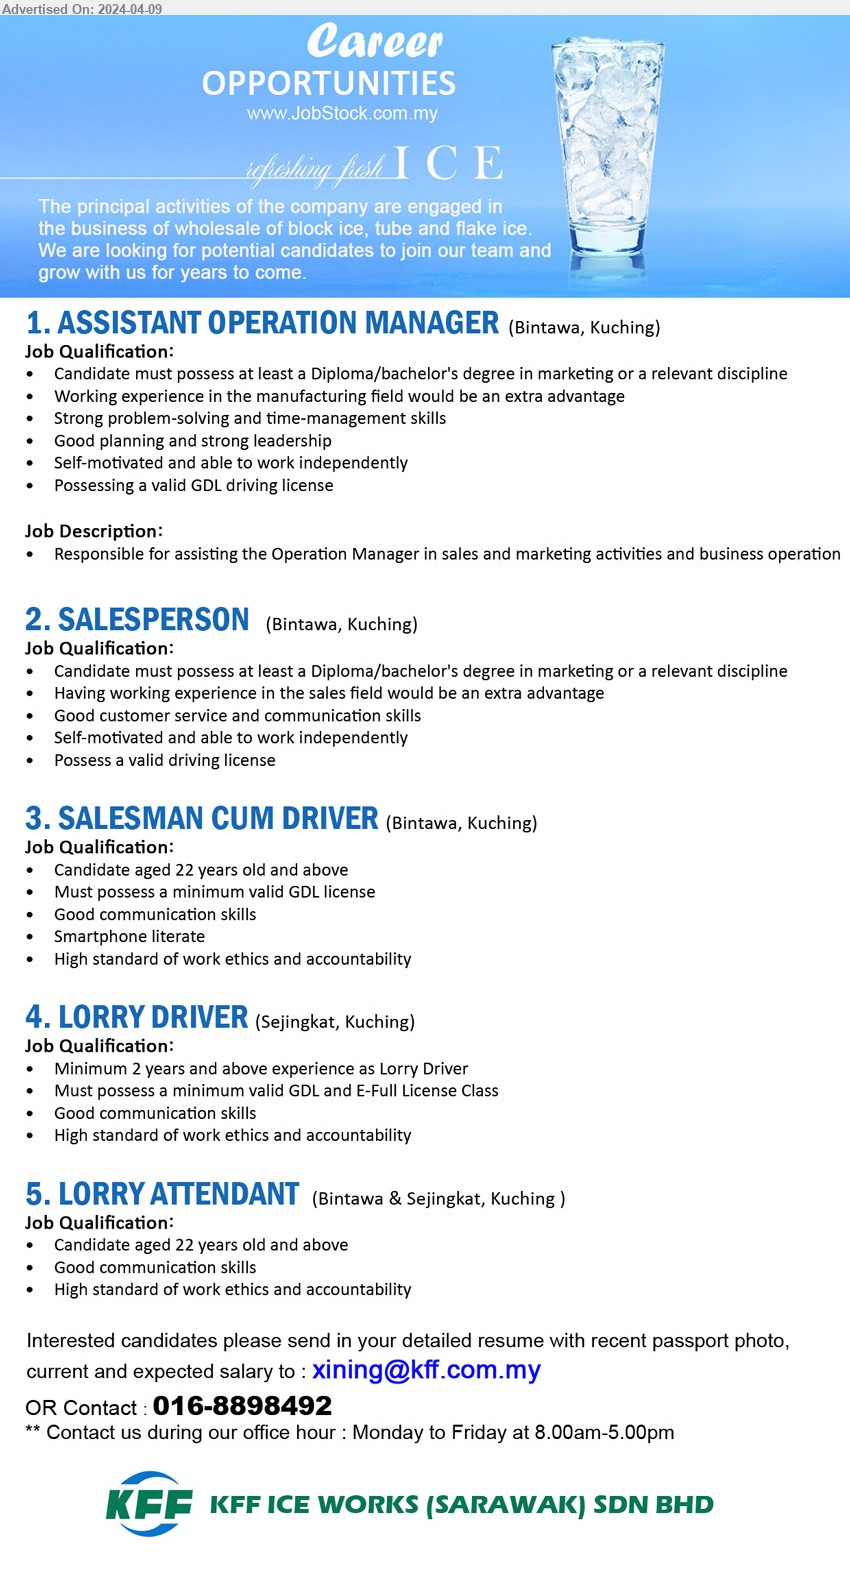 KFF ICE WORKS (SARAWAK) SDN BHD - 1. ASSISTANT OPERATION MANAGER (Kuching), Diploma / Bachelor's Degree in Marketing, working experience in the manufacturing field,...
2. SALESPERSON (Kuching),  Diploma / Bachelor's Degree in Marketing, Having working experience in the sales field would be an extra advantage,...
3. SALESMAN CUM DRIVER (Kuching), Good communication skills, Smartphone literate ,...
4. LORRY DRIVER  (Kuching), 2 yrs. exp., Must possess a minimum valid GDL and E-Full License Class,...
5. LORRY ATTENDANT (Kuching), Candidate aged 22 years old and above ,...
Contact : 016-8898492 / Email resume to ...